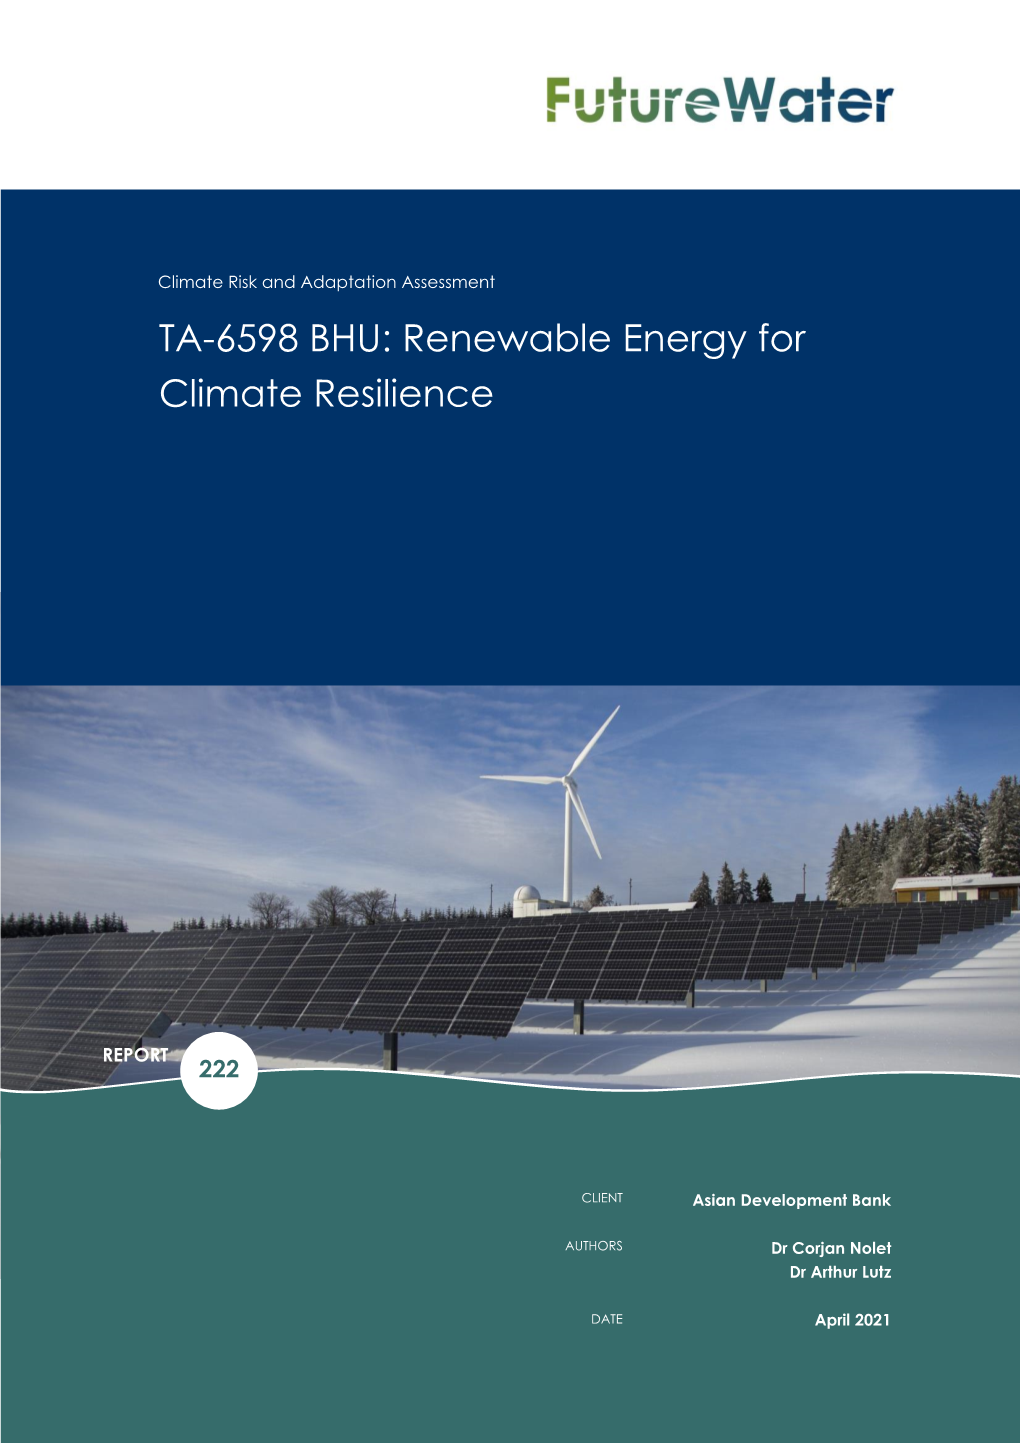 TA-6598 BHU: Renewable Energy for Climate Resilience